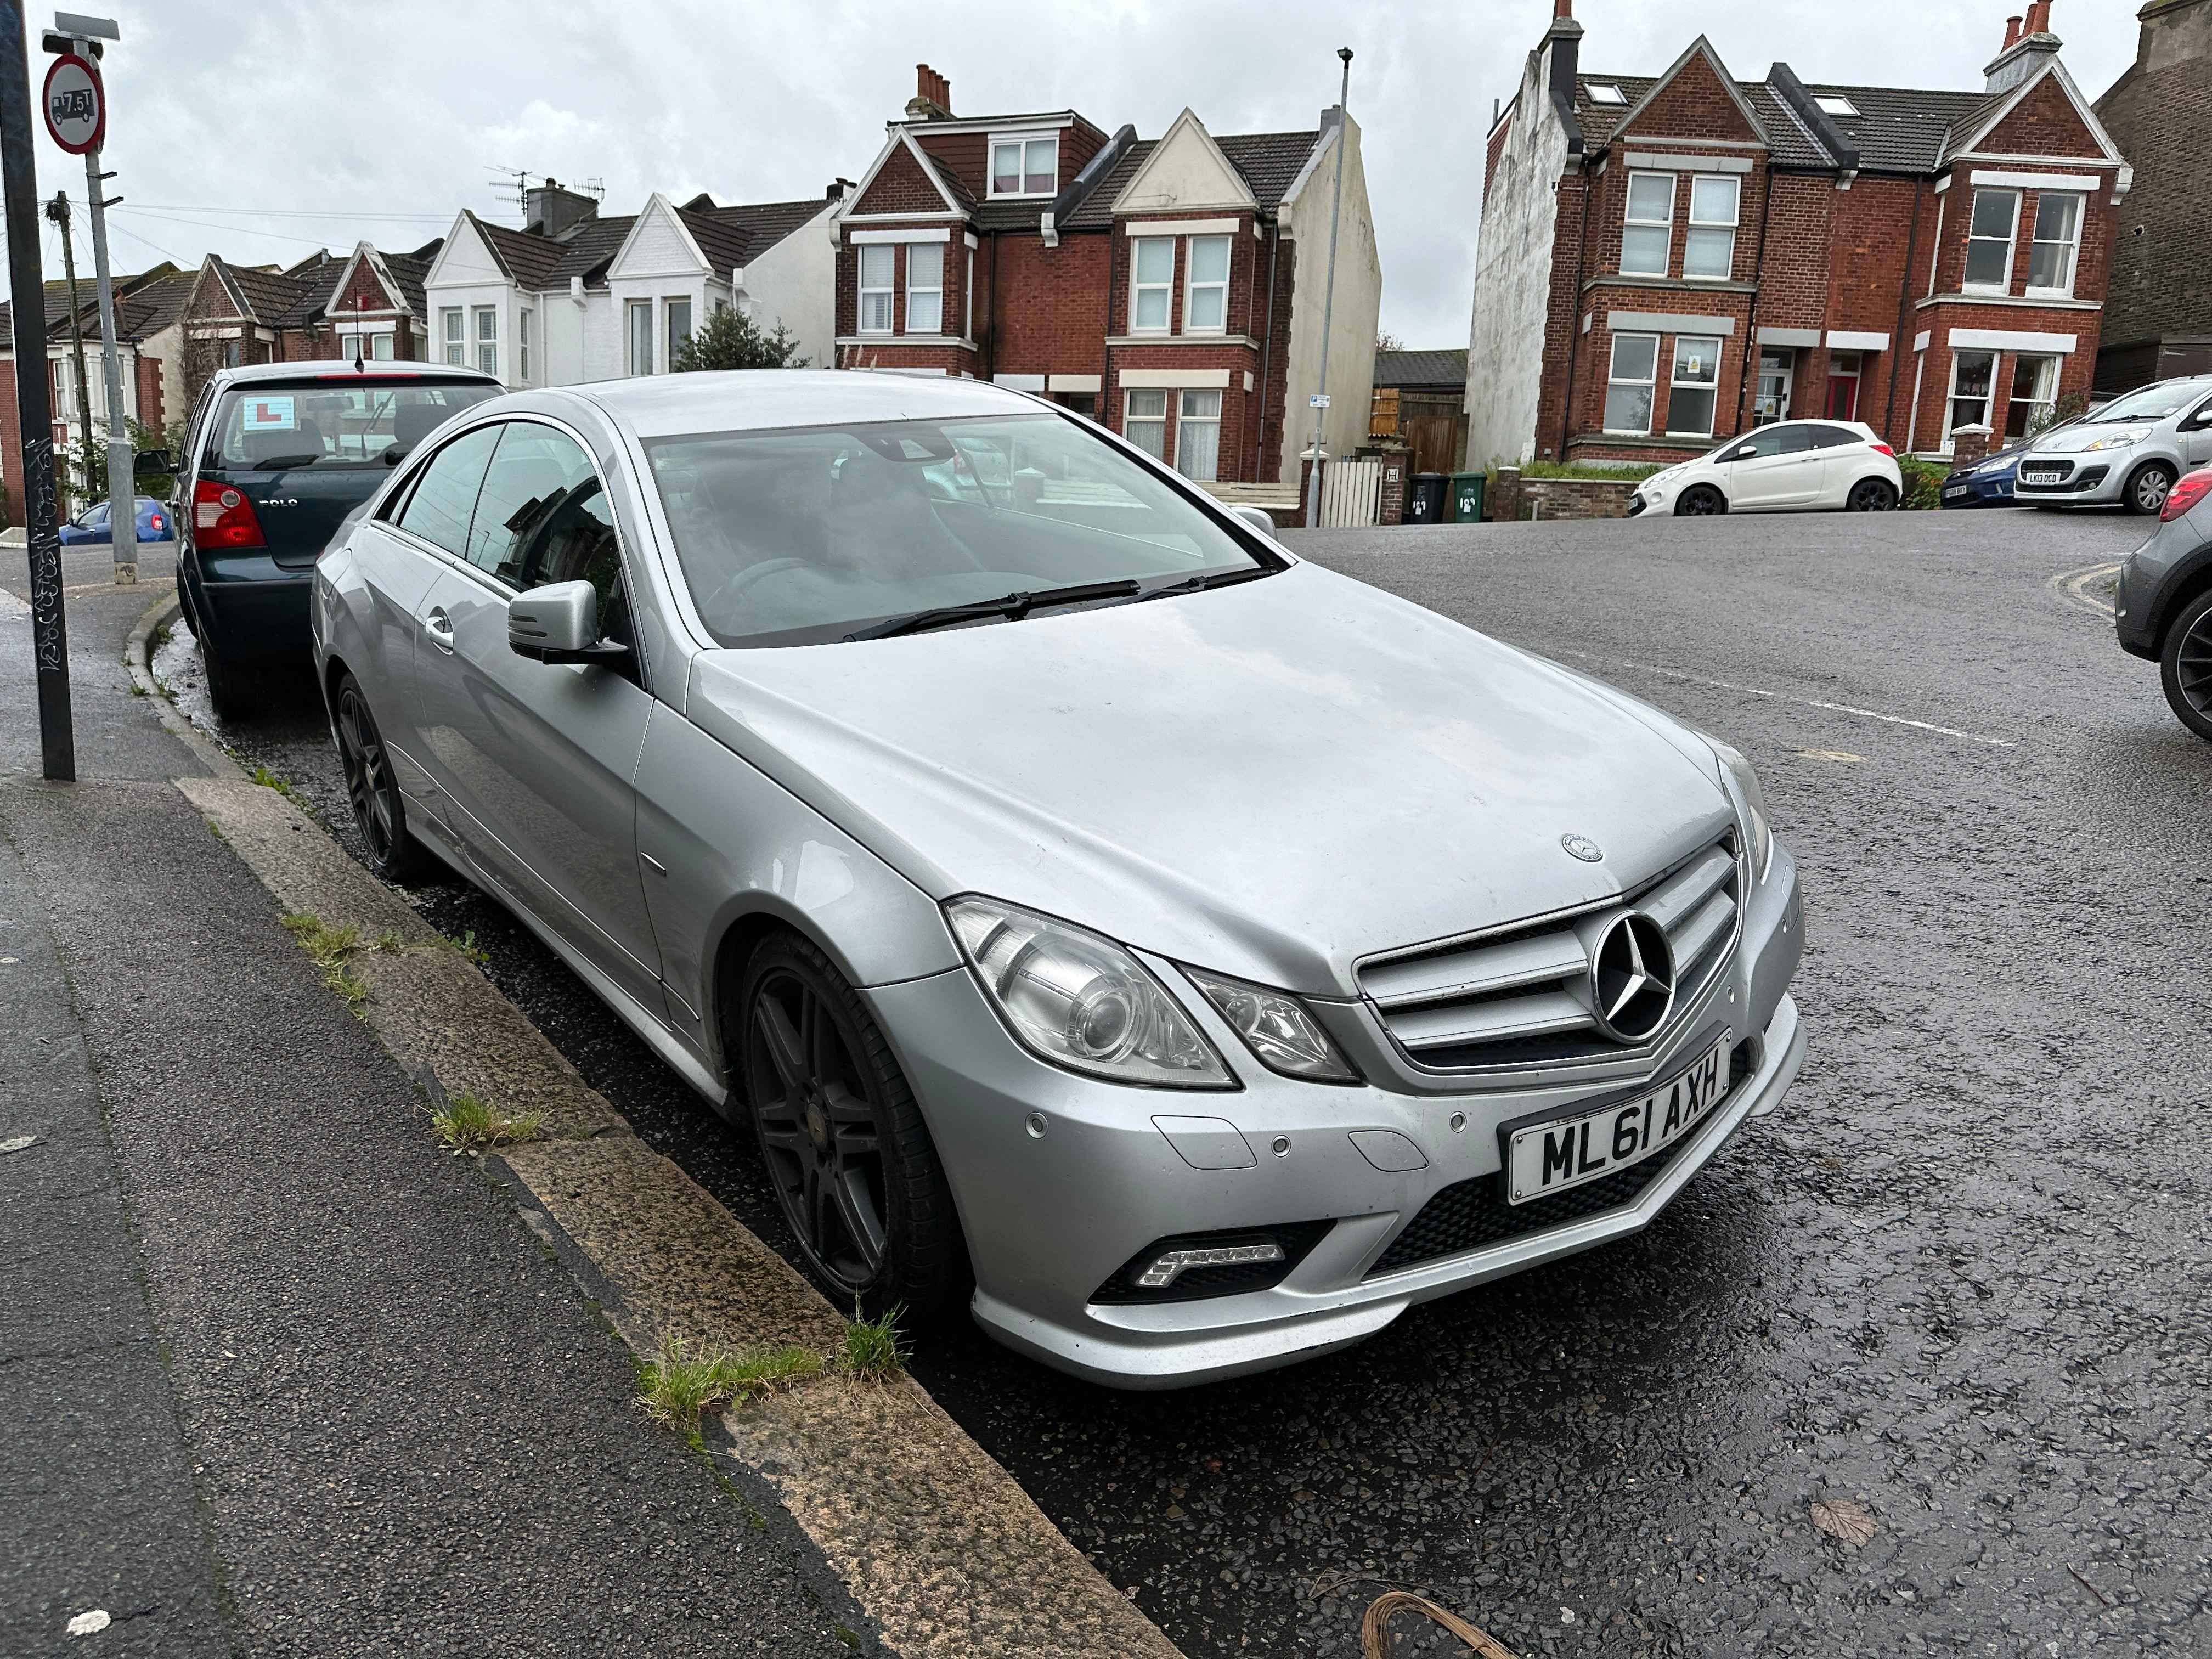 Photograph of ML61 AXH - a SIlver Mercedes E Class parked in Hollingdean by a non-resident, and potentially abandoned. The fifth of five photographs supplied by the residents of Hollingdean.